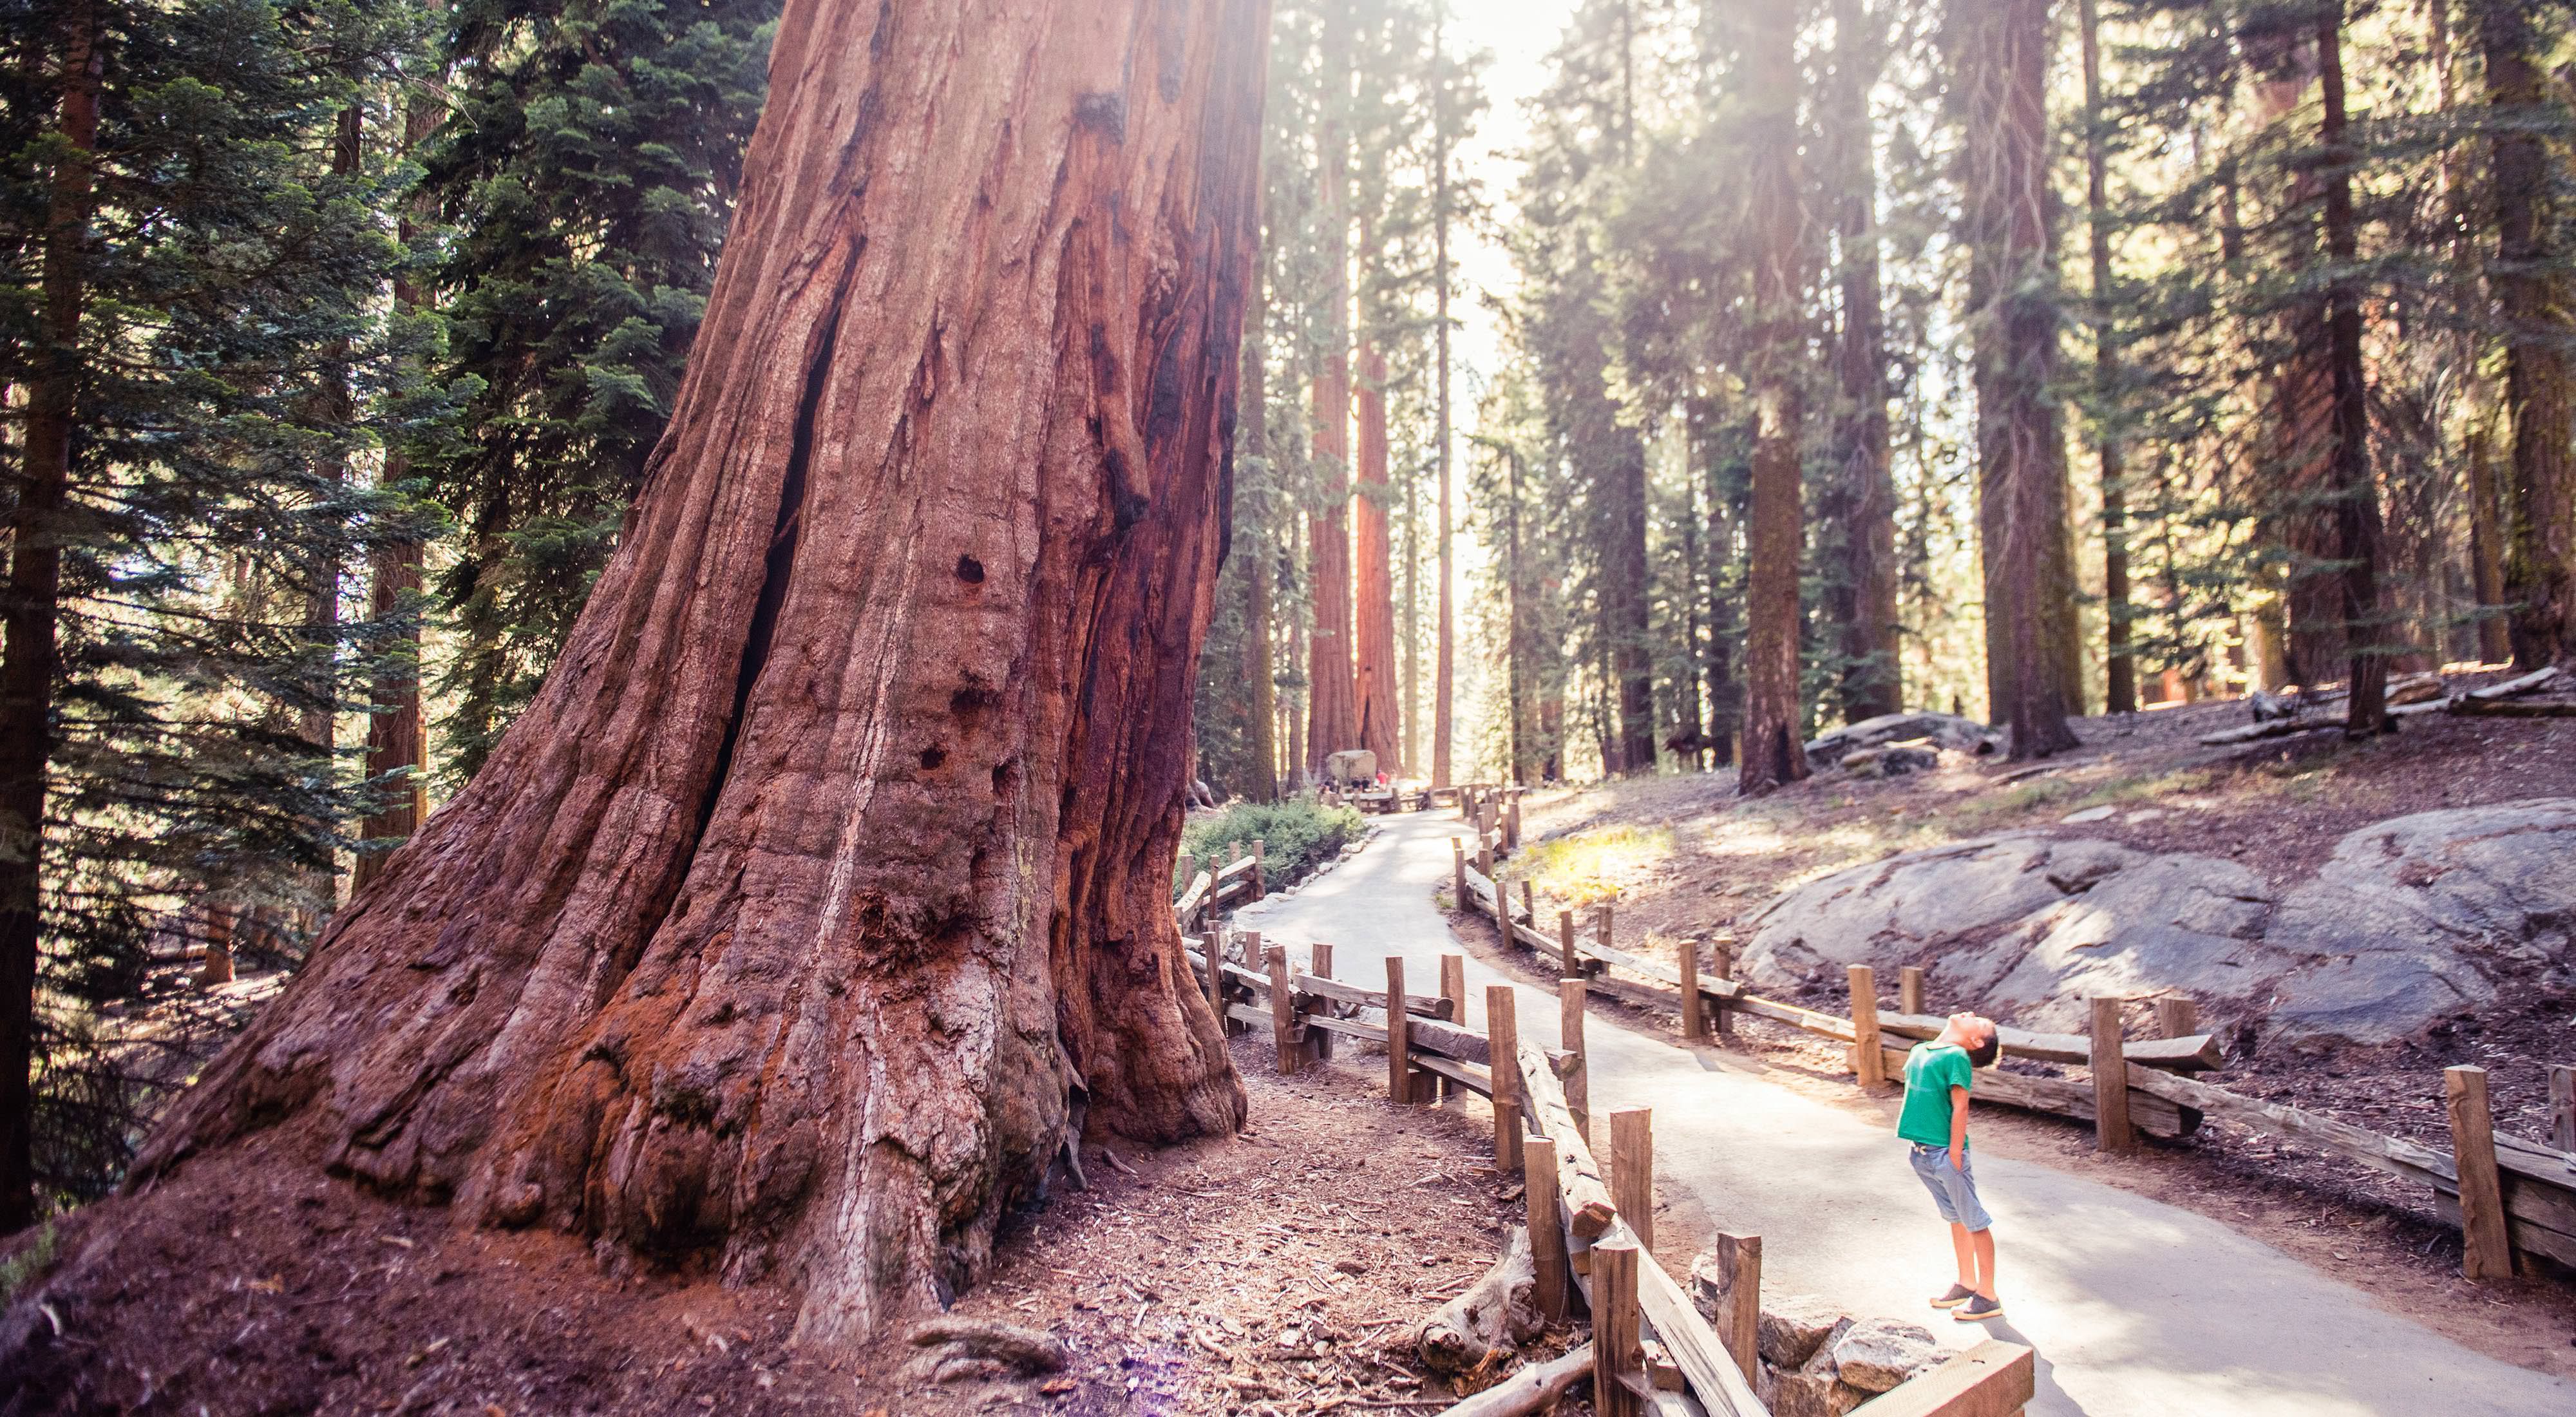 Photo of a young boy on a walkway staring up at a giant Sequoia tree.